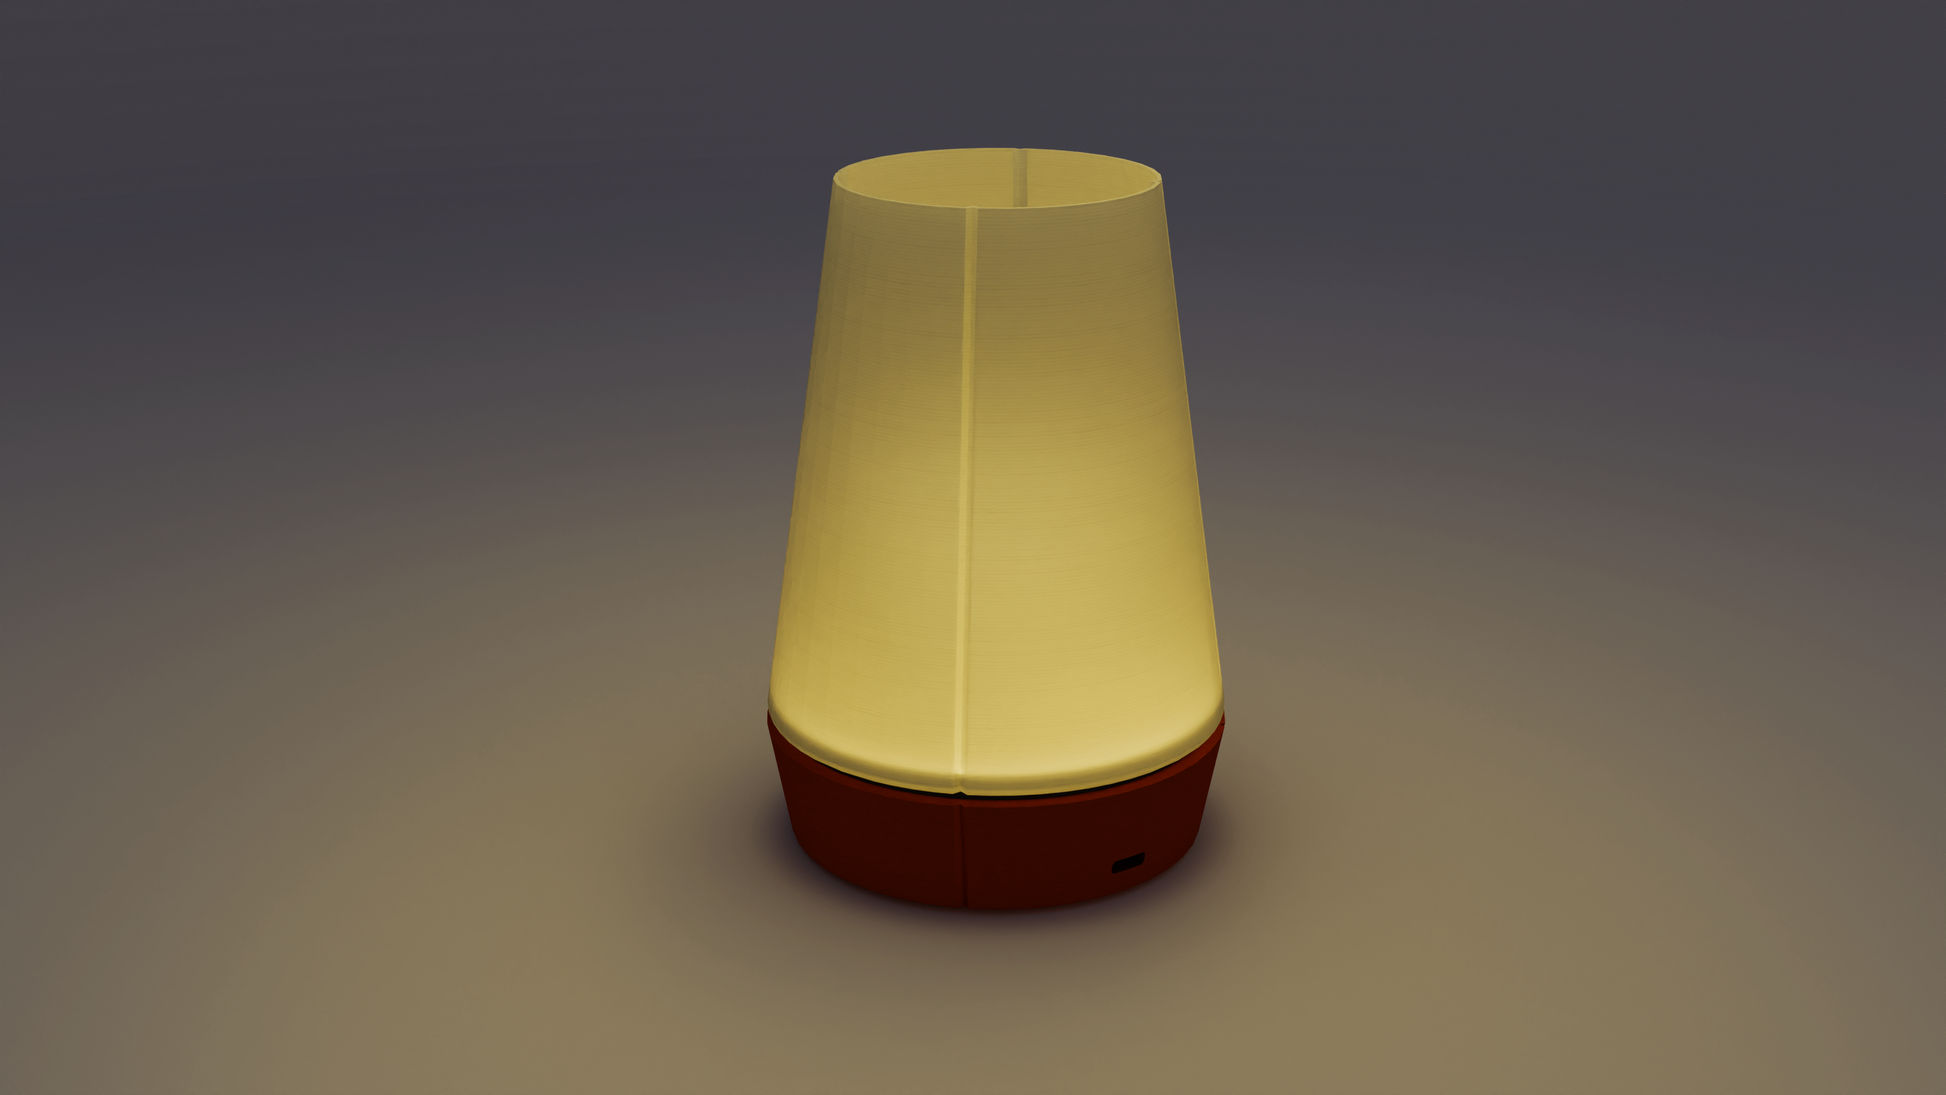 Minimalist Venti lamp with cone diffuser and Bluetooth connectivity for smart functions.